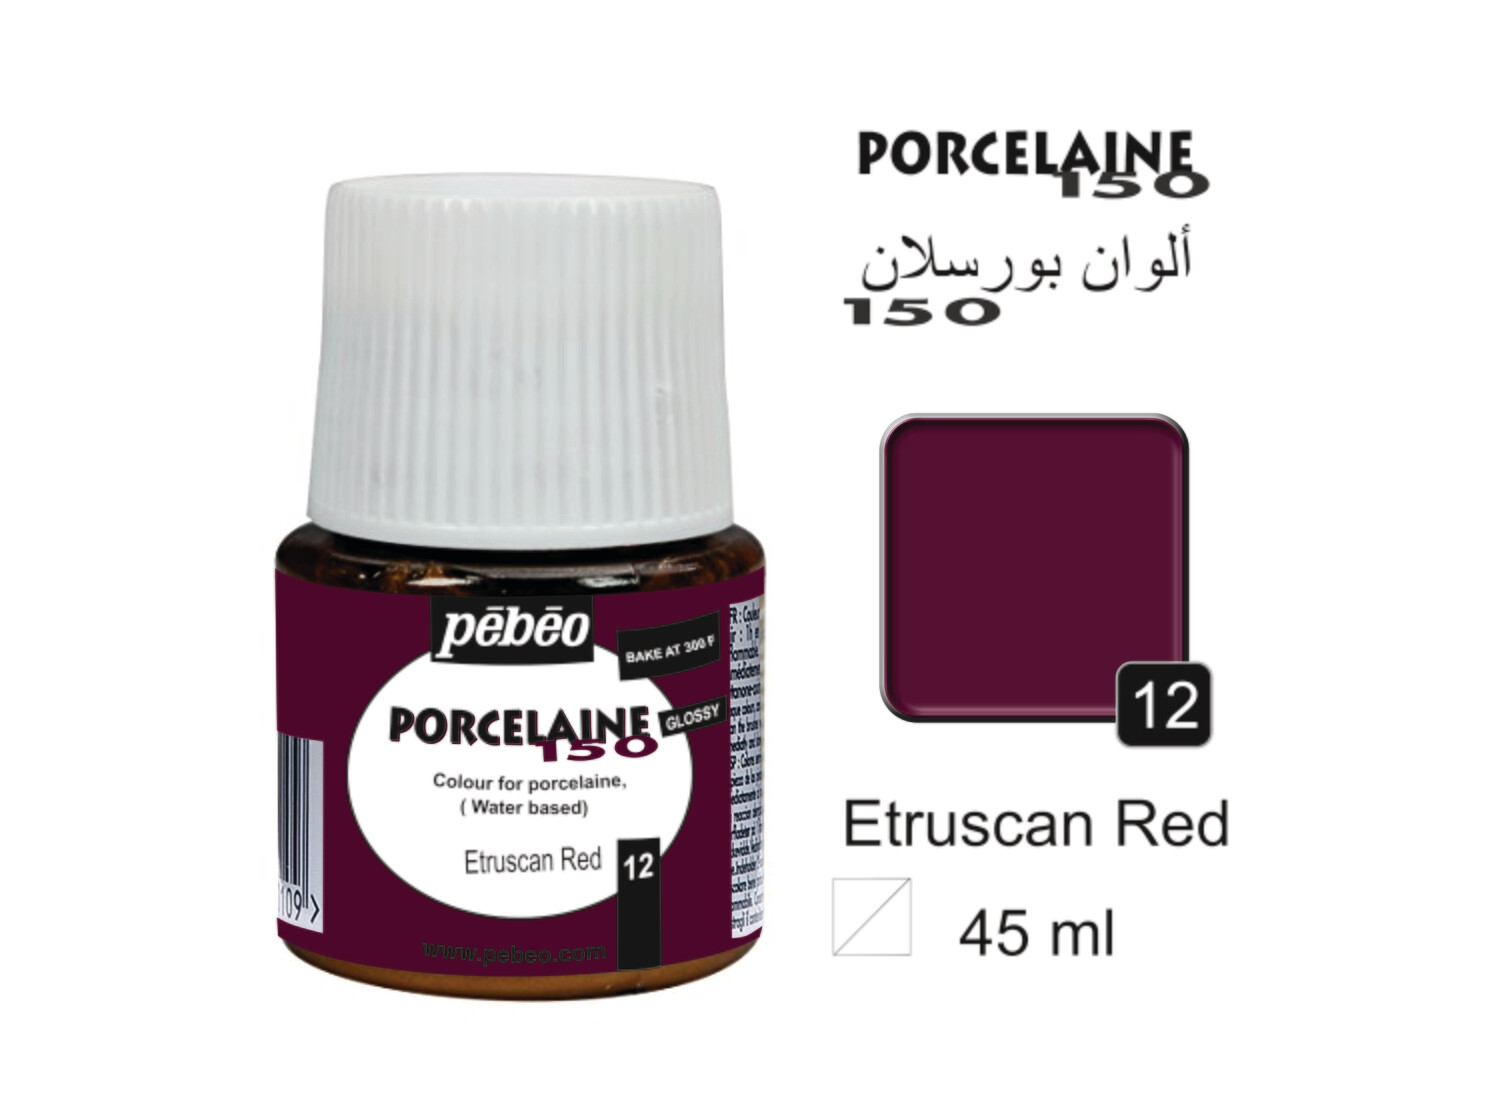 PORCELAINE 150, GLOSS 45 ml, Etruscan red No. 12